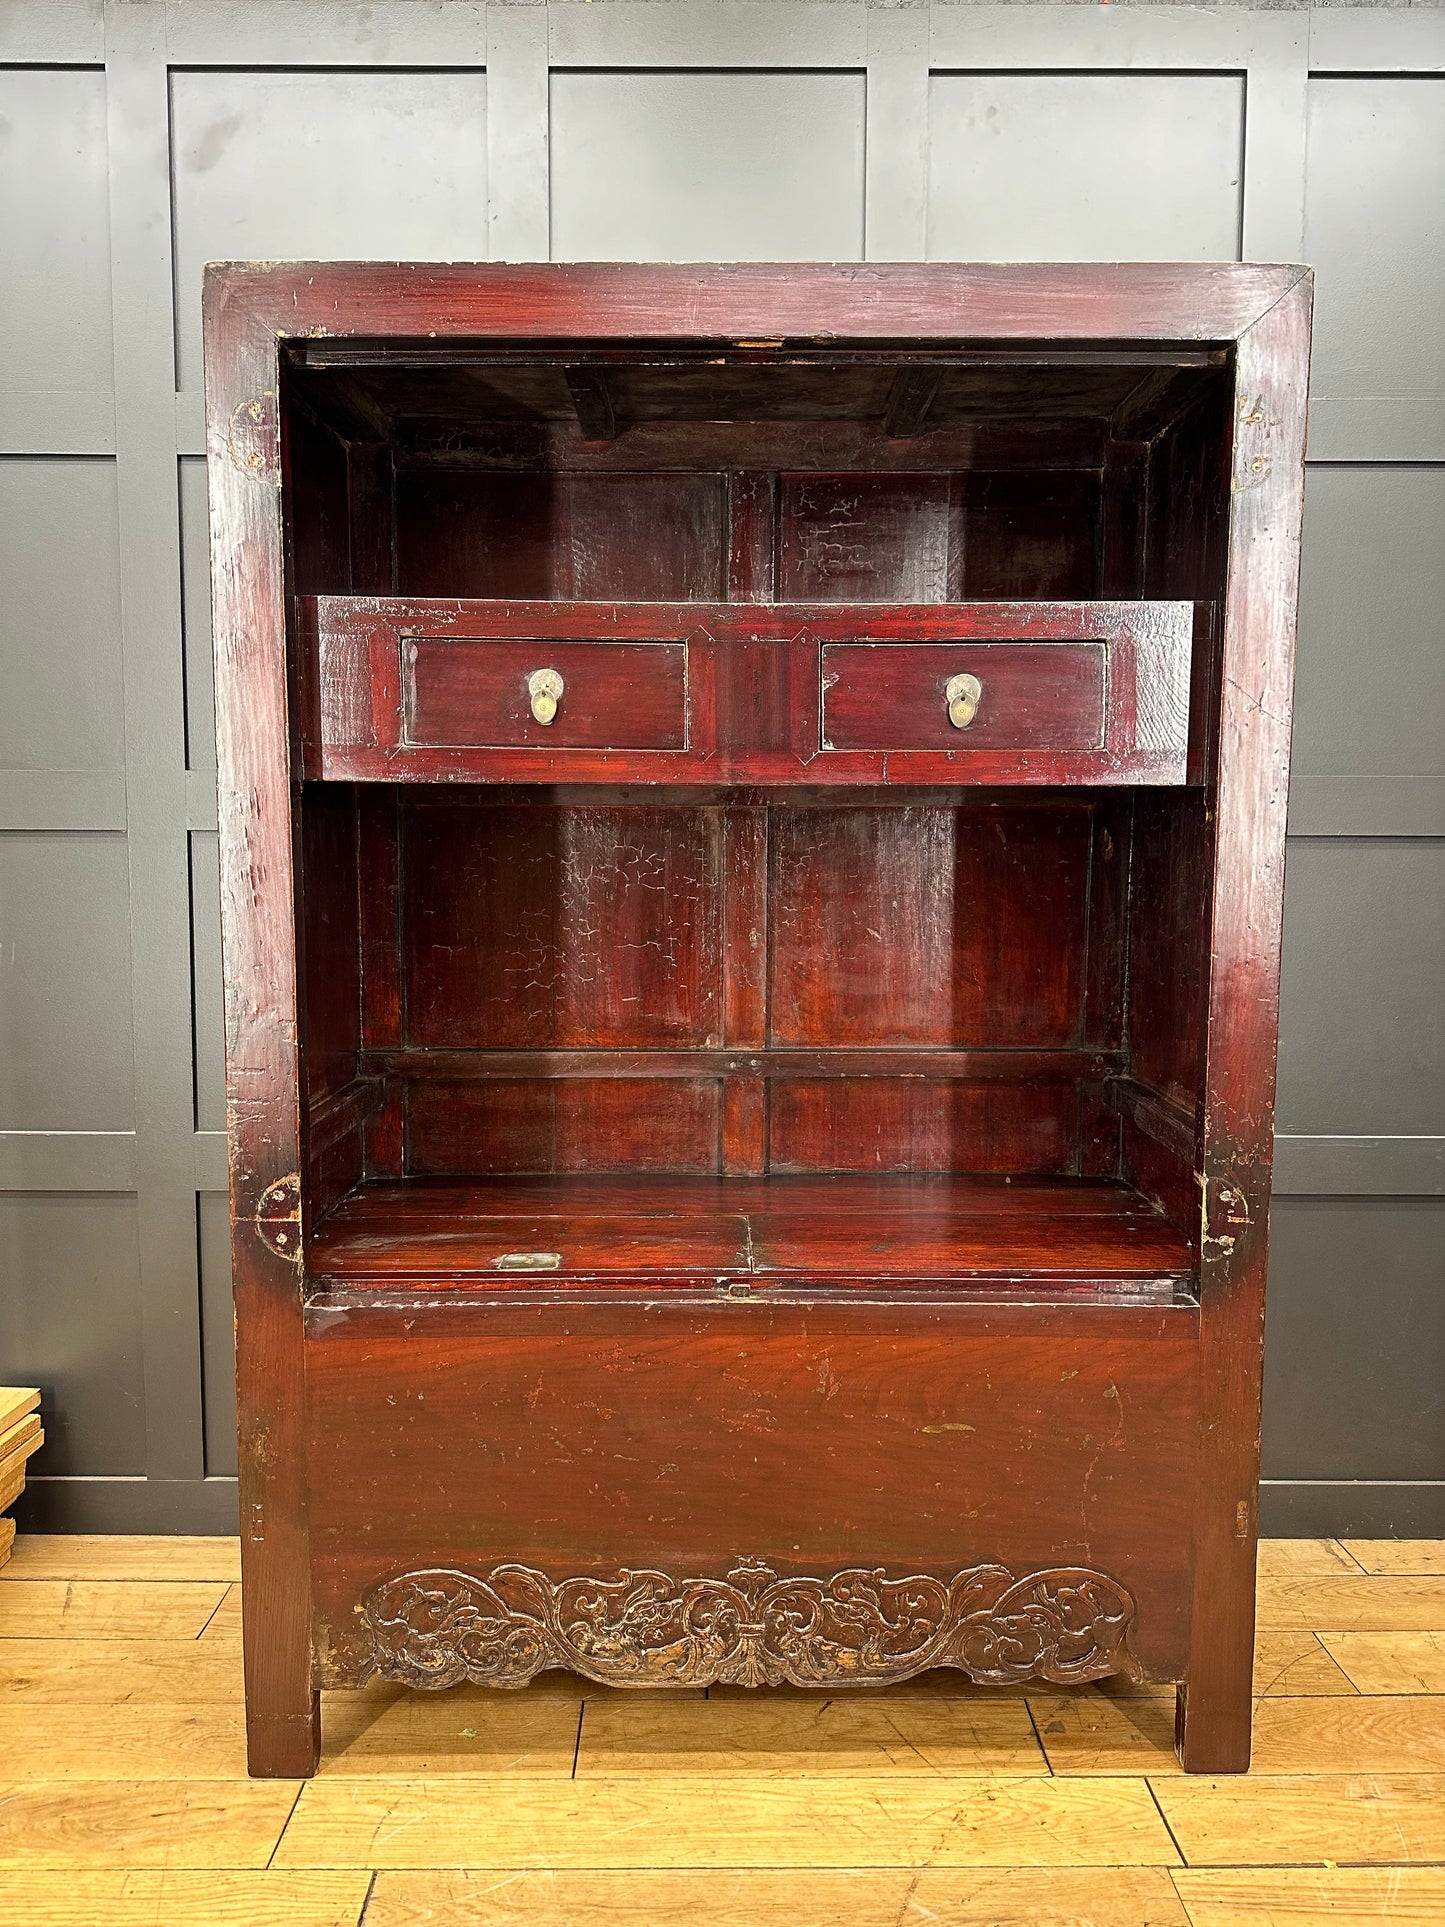 Antique Chinese Open Cabinet - Antique Display - Red Wedding Cabinet - Bookcase